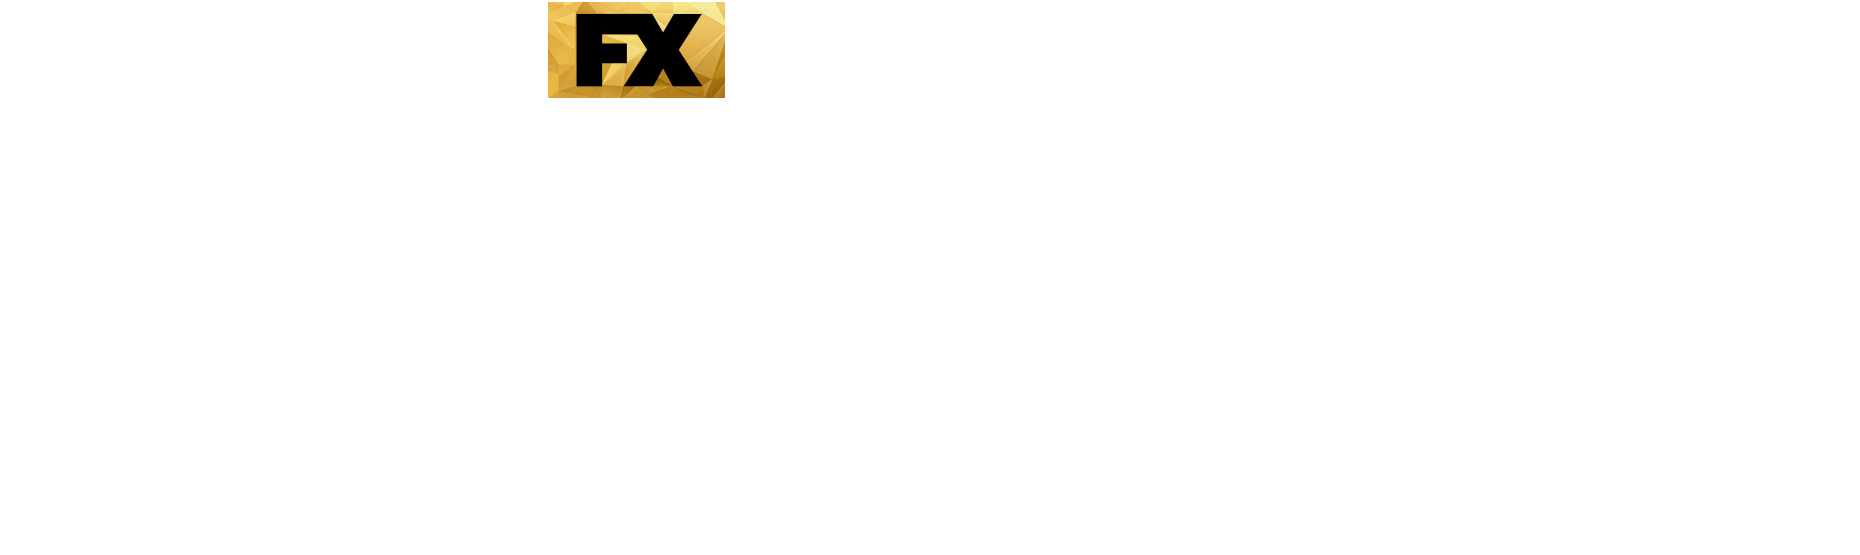 Hysterical Show Logo